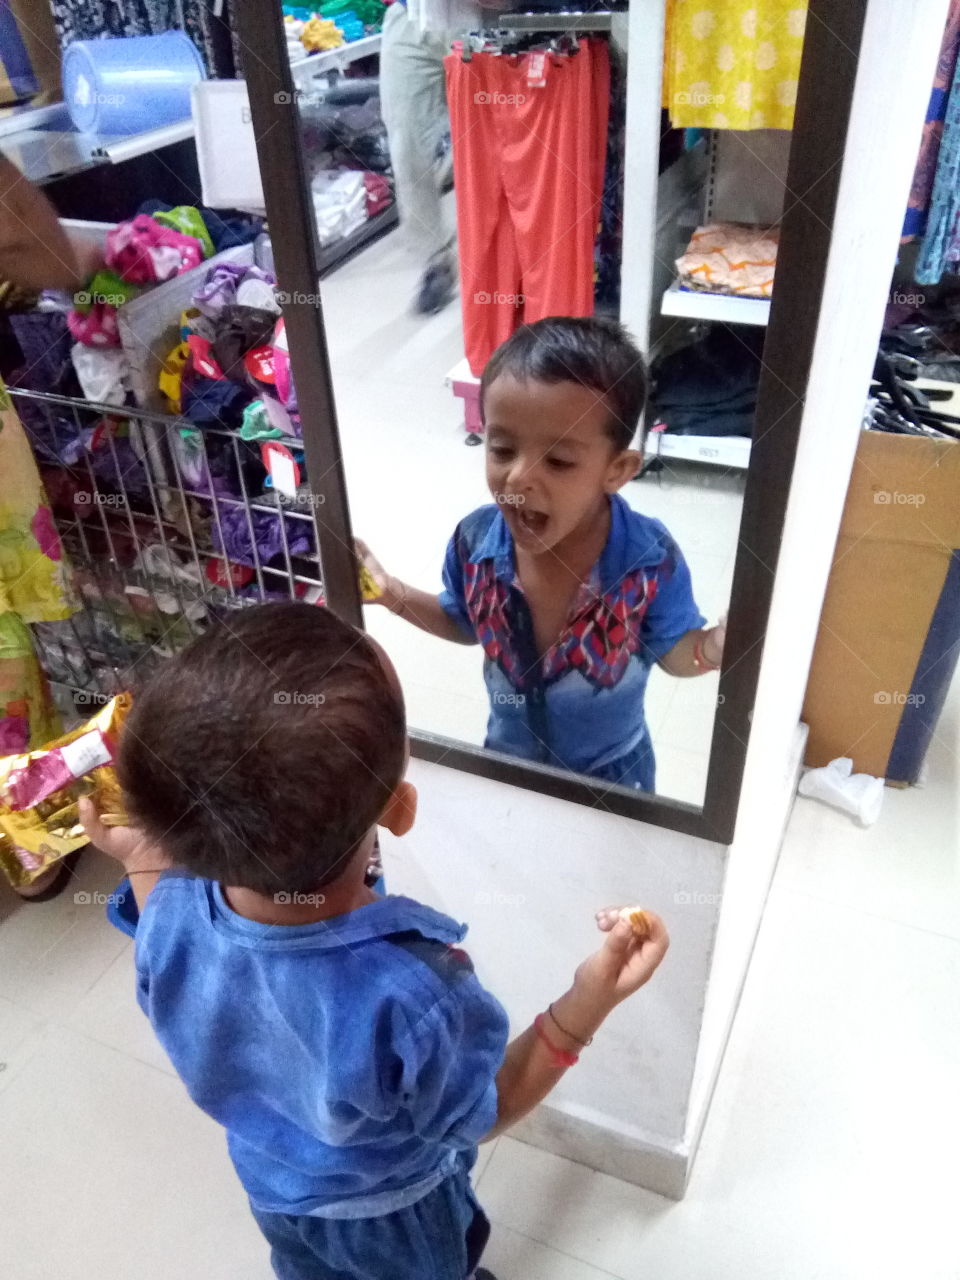 Little boy playing with mirror.